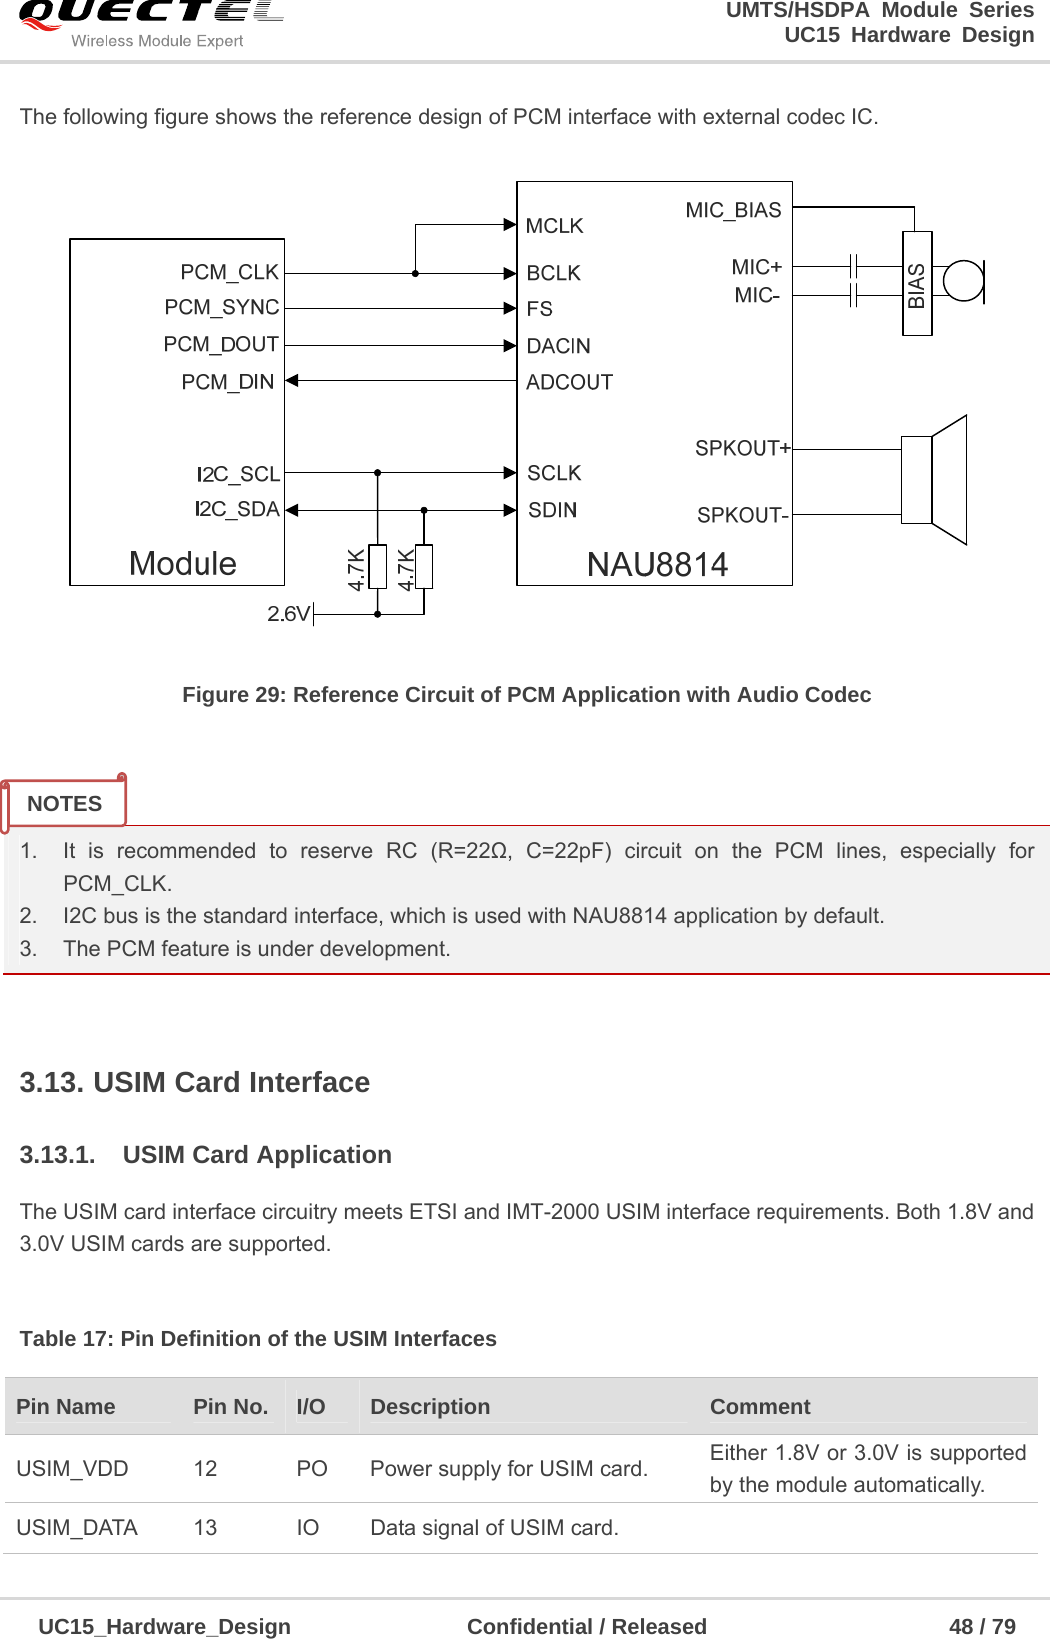                                                                        UMTS/HSDPA Module Series                                                                 UC15 Hardware Design  UC15_Hardware_Design                Confidential / Released                      48 / 79    The following figure shows the reference design of PCM interface with external codec IC.  Figure 29: Reference Circuit of PCM Application with Audio Codec   1.  It is recommended to reserve RC (R=22Ω, C=22pF) circuit on the PCM lines, especially for PCM_CLK. 2.  I2C bus is the standard interface, which is used with NAU8814 application by default. 3.  The PCM feature is under development.  3.13. USIM Card Interface 3.13.1.  USIM Card Application The USIM card interface circuitry meets ETSI and IMT-2000 USIM interface requirements. Both 1.8V and 3.0V USIM cards are supported.  Table 17: Pin Definition of the USIM Interfaces Pin Name    Pin No.  I/O  Description  Comment USIM_VDD  12  PO  Power supply for USIM card.  Either 1.8V or 3.0V is supported by the module automatically. USIM_DATA  13  IO  Data signal of USIM card.   NOTES 